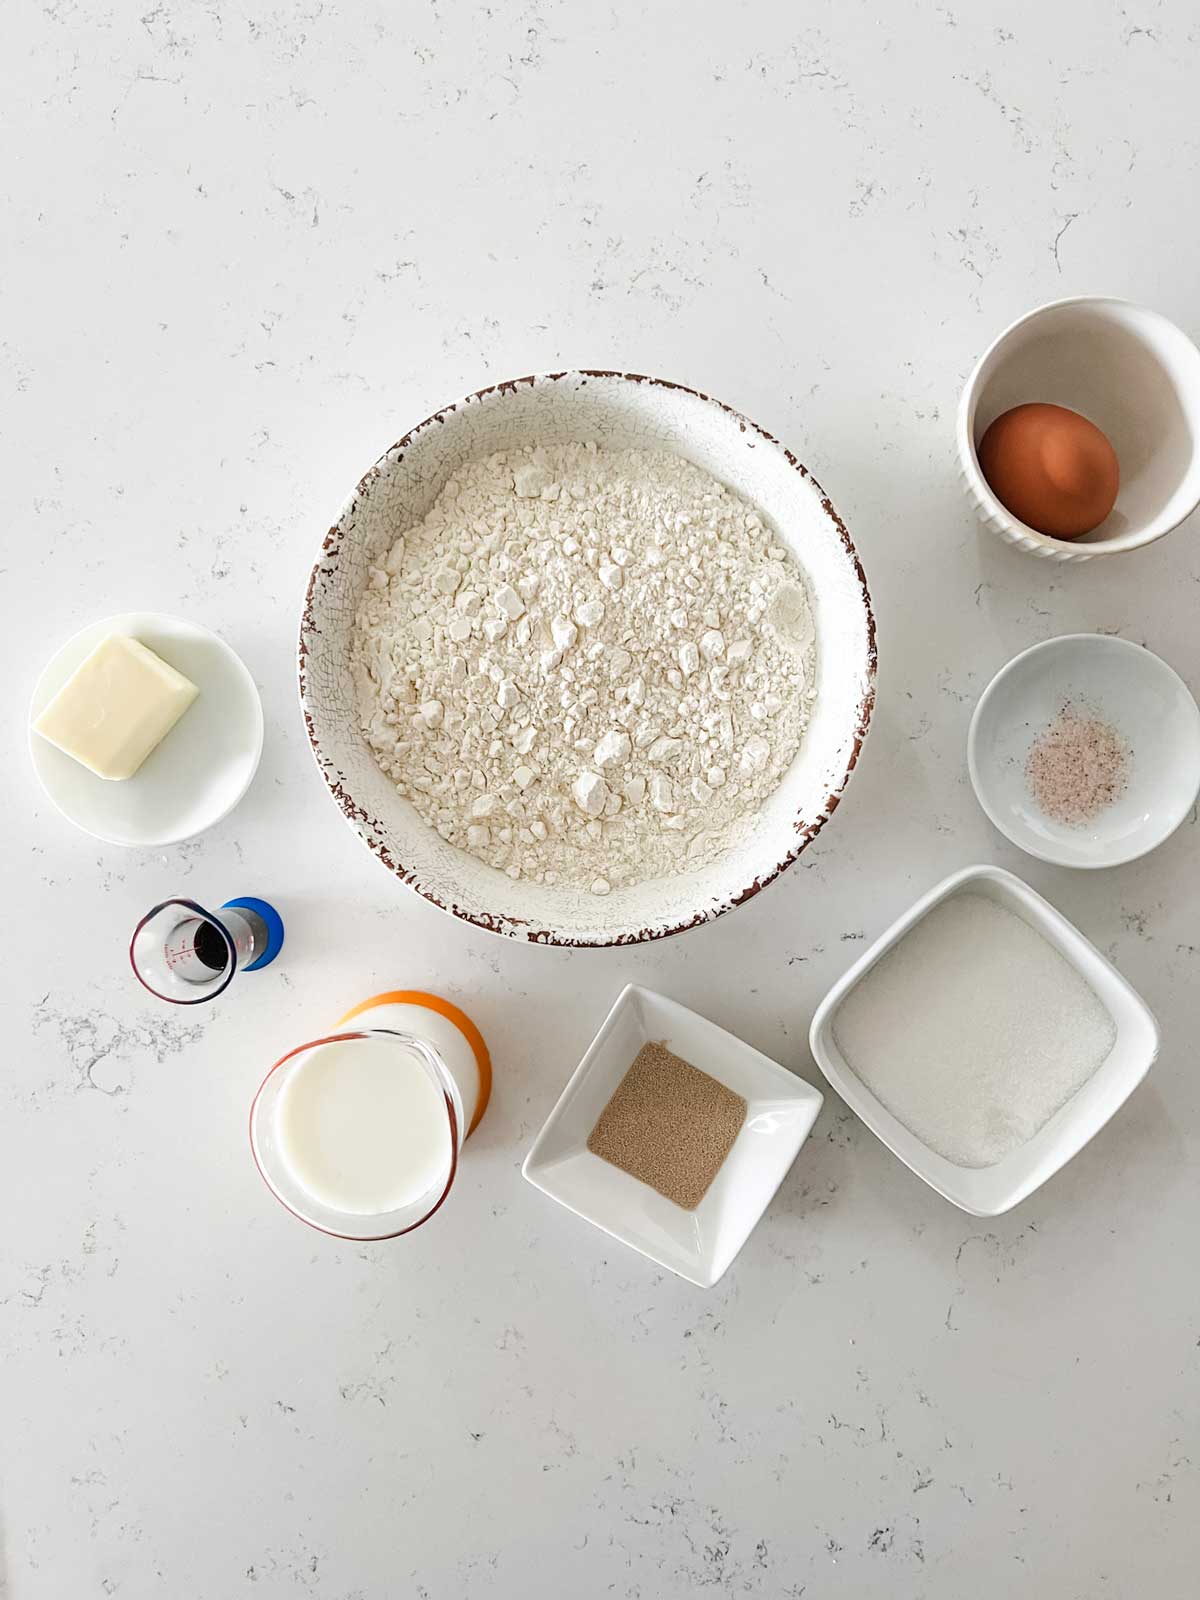 Overhead photo of ingredients for cinnamon roll dough.